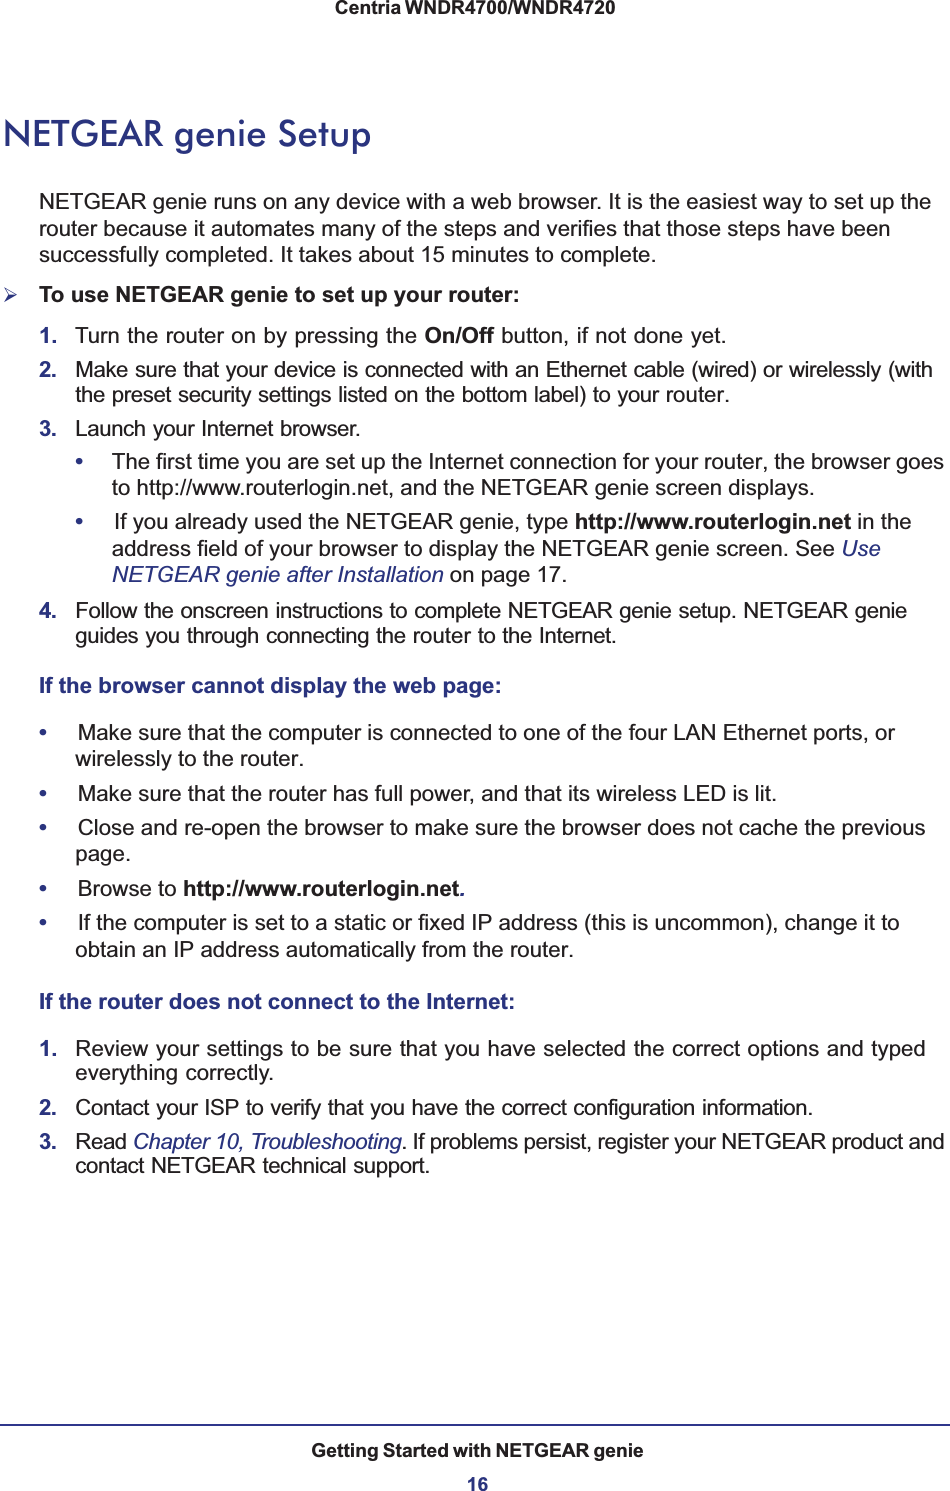 Getting Started with NETGEAR genie16Centria WNDR4700/WNDR4720 NETGEAR genie SetupNETGEAR genie runs on any device with a web browser. It is the easiest way to set up the router because it automates many of the steps and verifies that those steps have been successfully completed. It takes about 15  minutes to complete. ¾To use NETGEAR genie to set up your router:1. Turn the router on by pressing the On/Off button, if not done yet. 2. Make sure that your device is connected with an Ethernet cable (wired) or wirelessly (with the preset security settings listed on the bottom label) to your router.3. Launch your Internet browser.•The first time you are set up the Internet connection for your router, the browser goes to http://www.routerlogin.net, and the NETGEAR genie screen displays.•If you already used the NETGEAR genie, type http://www.routerlogin.net in the address field of your browser to display the NETGEAR genie screen. See UseNETGEAR genie after Installation on page 17.4. Follow the onscreen instructions to complete NETGEAR genie setup. NETGEAR genie guides you through connecting the router to the Internet. If the browser cannot display the web page: •Make sure that the computer is connected to one of the four LAN Ethernet ports, or wirelessly to the router.•Make sure that the router has full power, and that its wireless LED is lit.•Close and re-open the browser to make sure the browser does not cache the previous page.•Browse to http://www.routerlogin.net.•If the computer is set to a static or fixed IP address (this is uncommon), change it to obtain an IP address automatically from the router.If the router does not connect to the Internet:1. Review your settings to be sure that you have selected the correct options and typed everything correctly. 2. Contact your ISP to verify that you have the correct configuration information.3. Read Chapter 10, Troubleshooting. If problems persist, register your NETGEAR product and contact NETGEAR technical support.